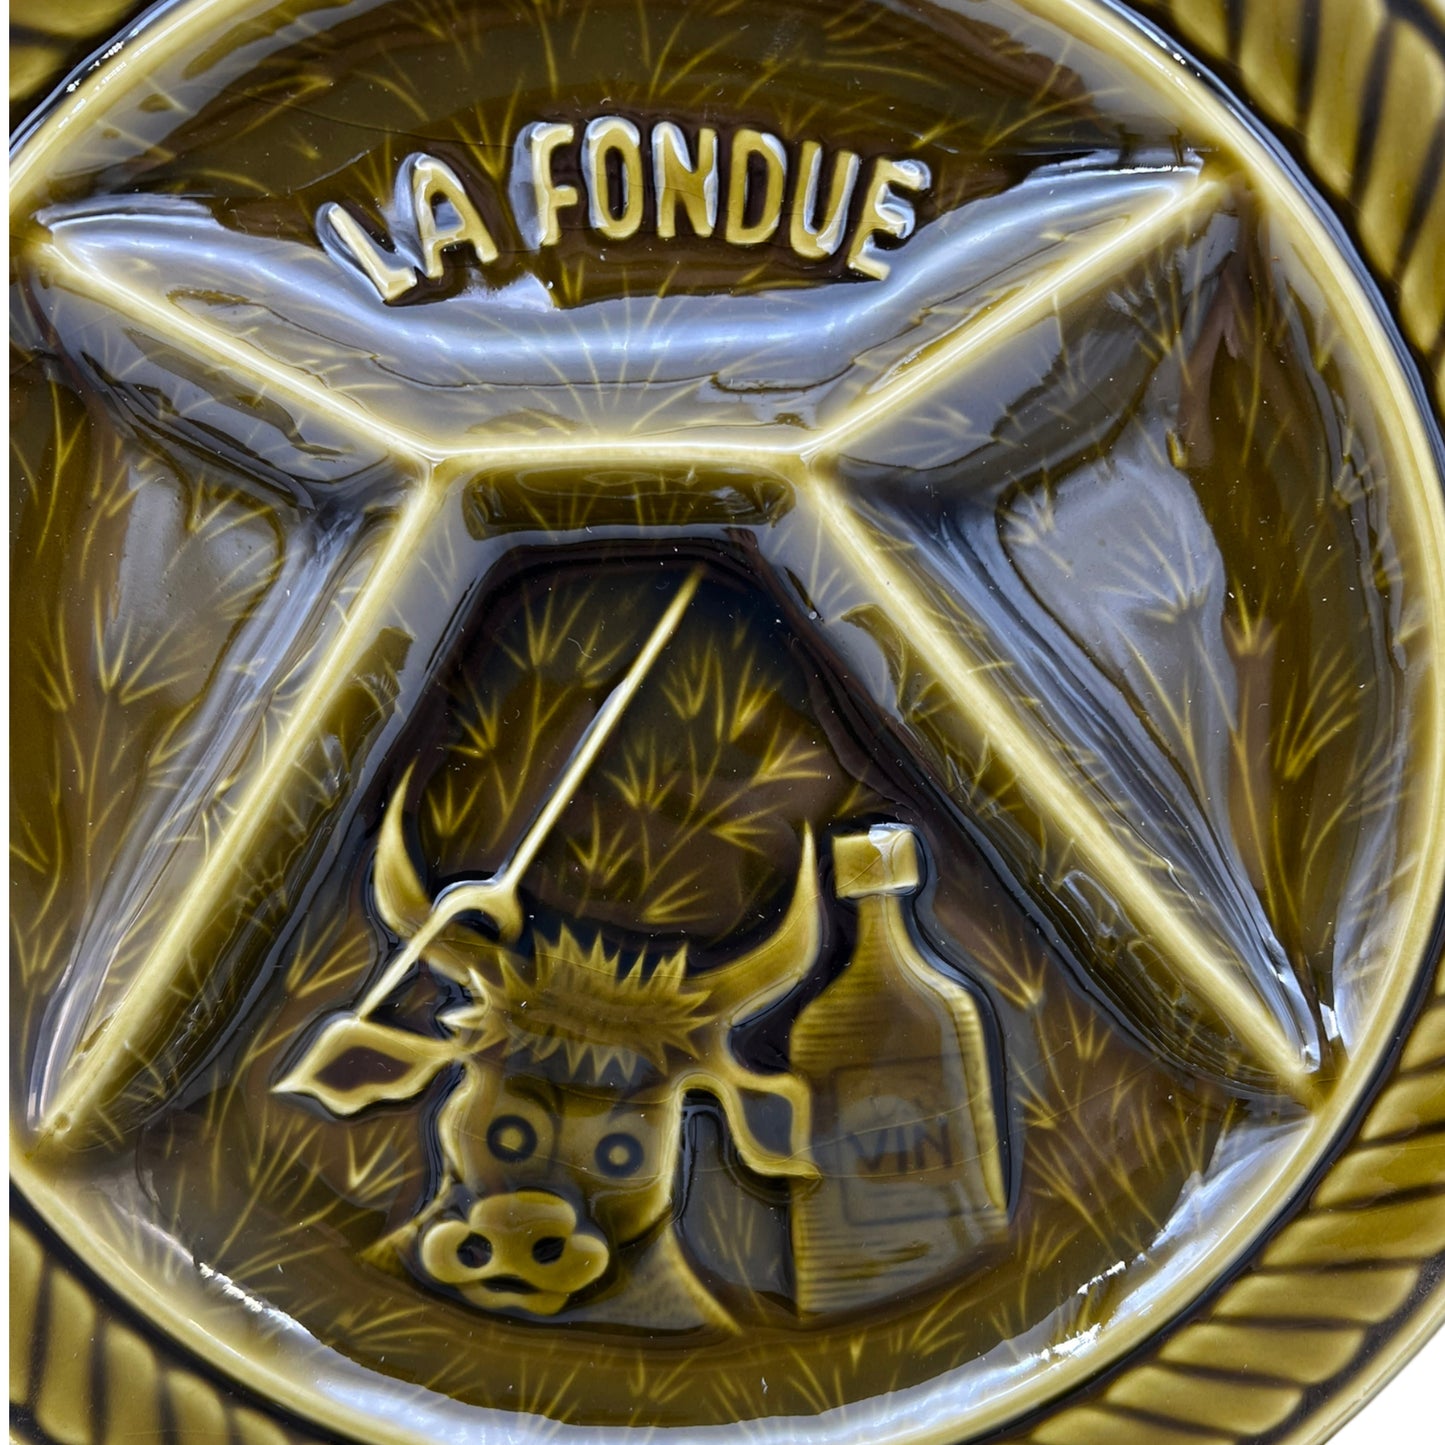 image 4 French vintage fondue plates sold by All Things French Store